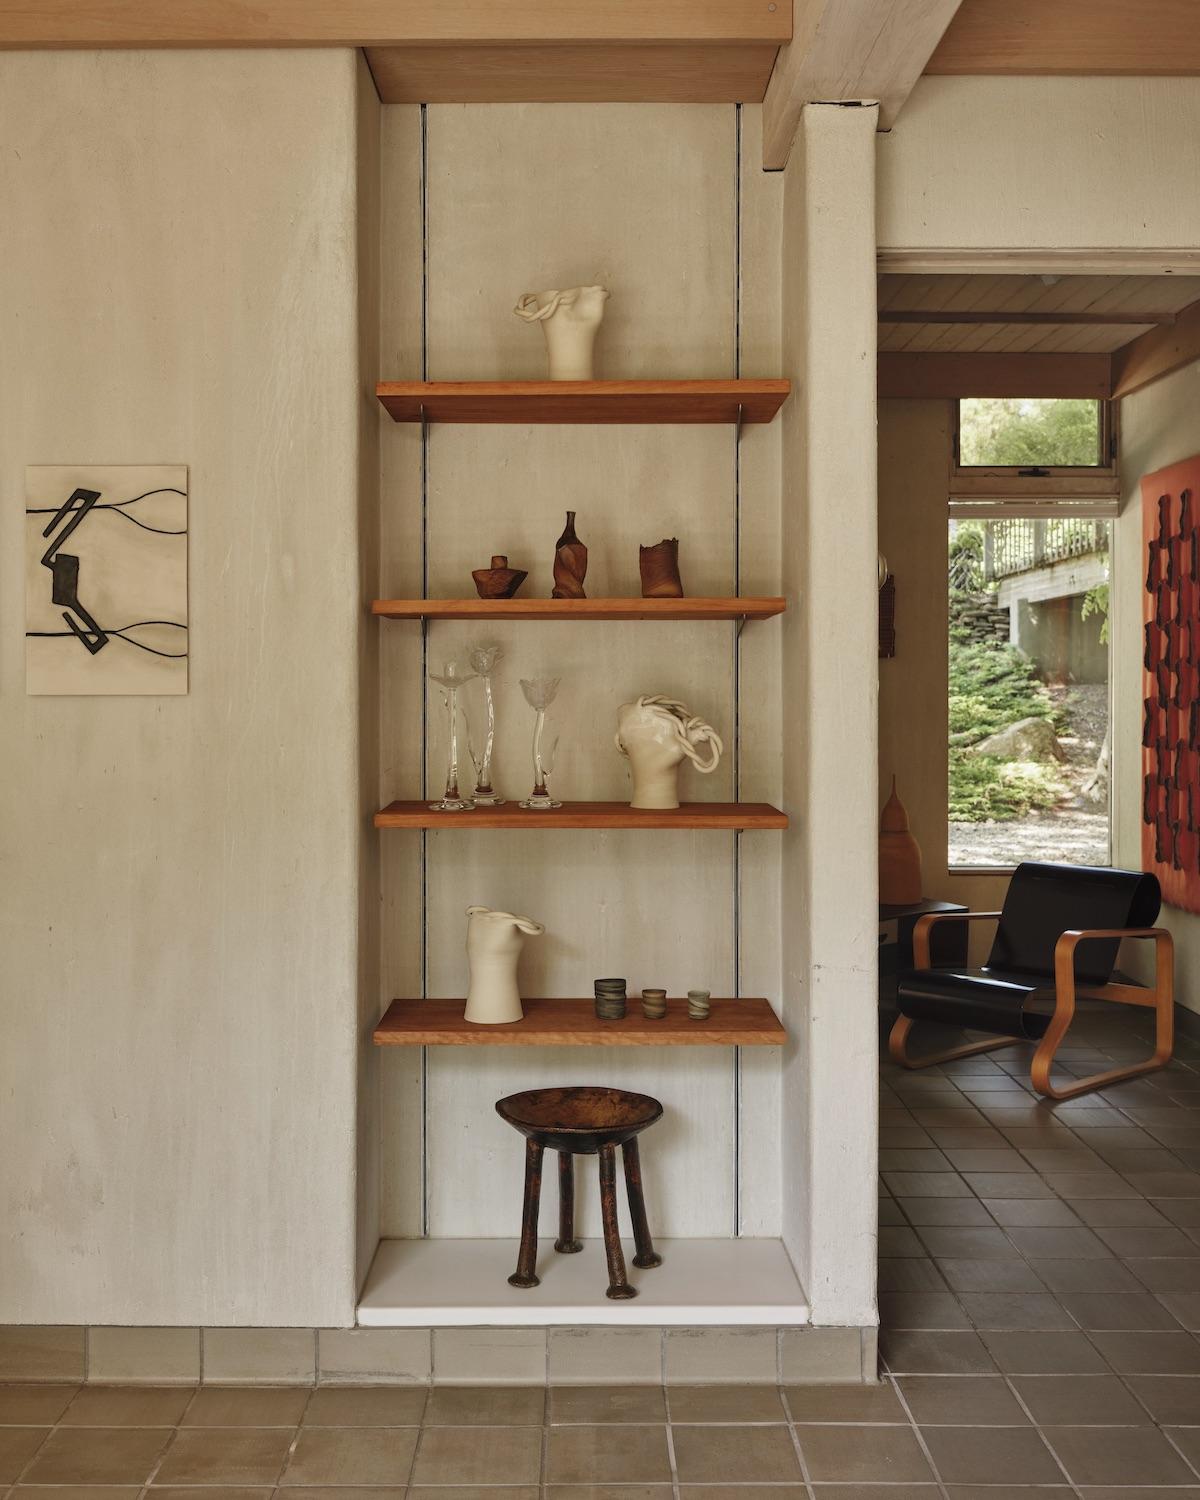 A Summer Arrangement: Object & Thing at LongHouse. LongHouse, East Hampton, New York. Photo by Adrian Gaut. Works pictured: [on wall] Enrico David, Untitled (2014); [shelves] ceramics by Laird Gough, Ludmilla Balkis and Jennifer Lee; glass Giardino candleholders by Sophie Lou Jacobsen; a wooden stand from the collection at LongHouse.